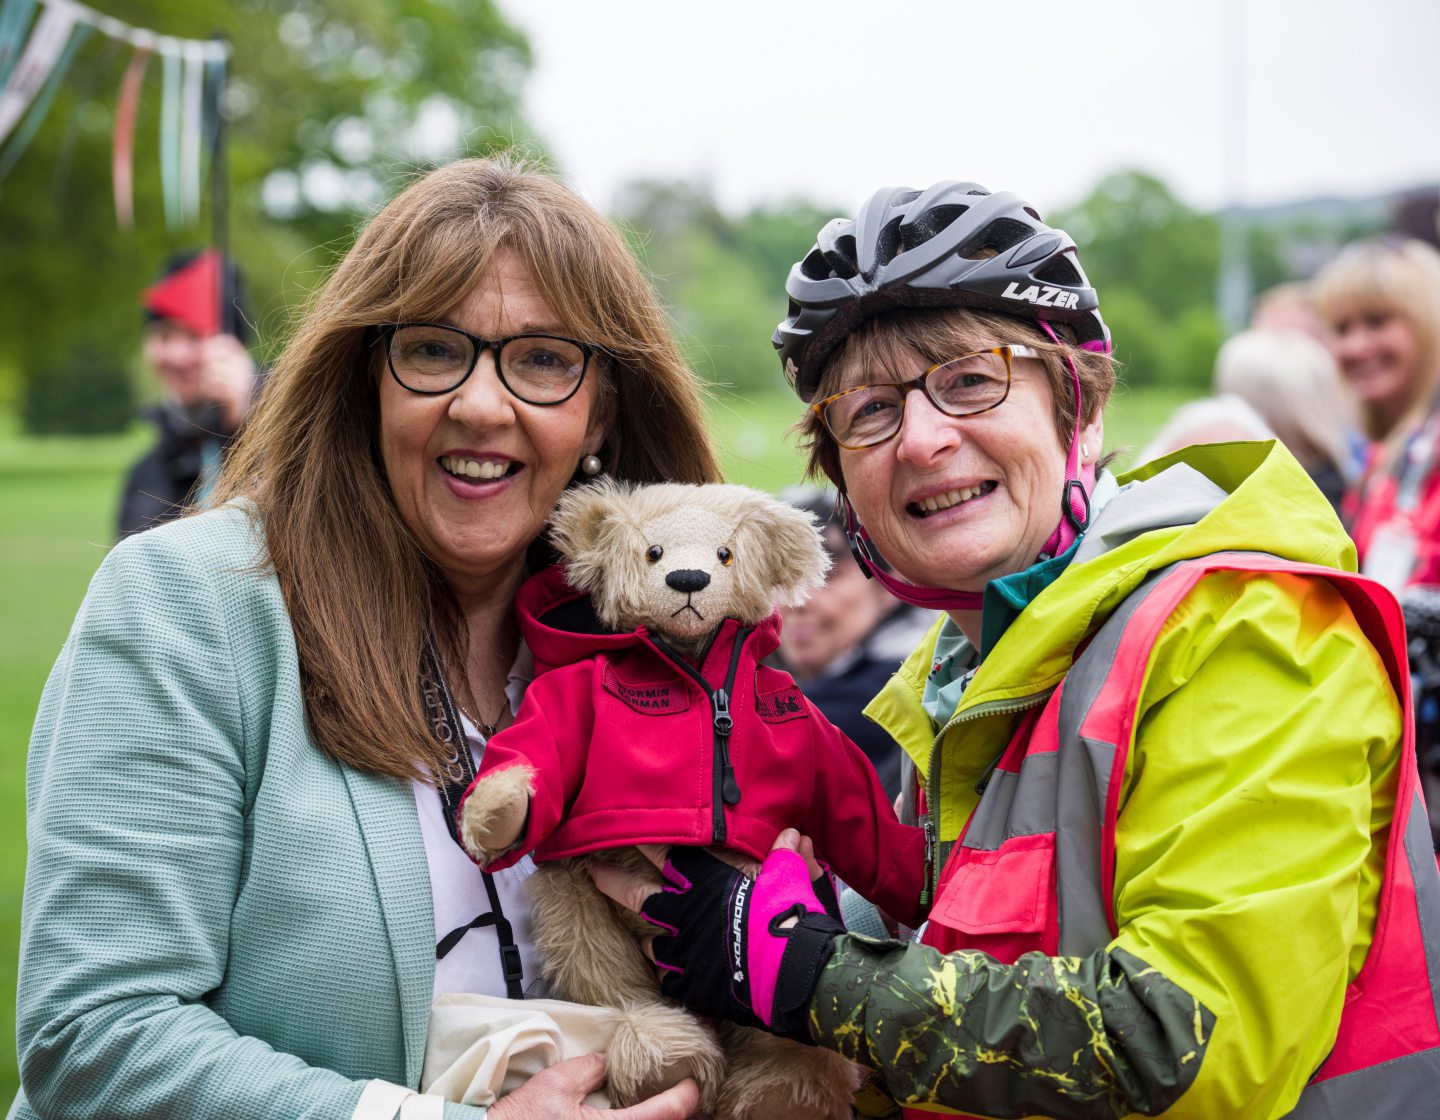 Christine Bell, chief executive of Cycling Without Age Scotland, with Norman Ridley's daughter Lorna and the Stormin' Norman bear.